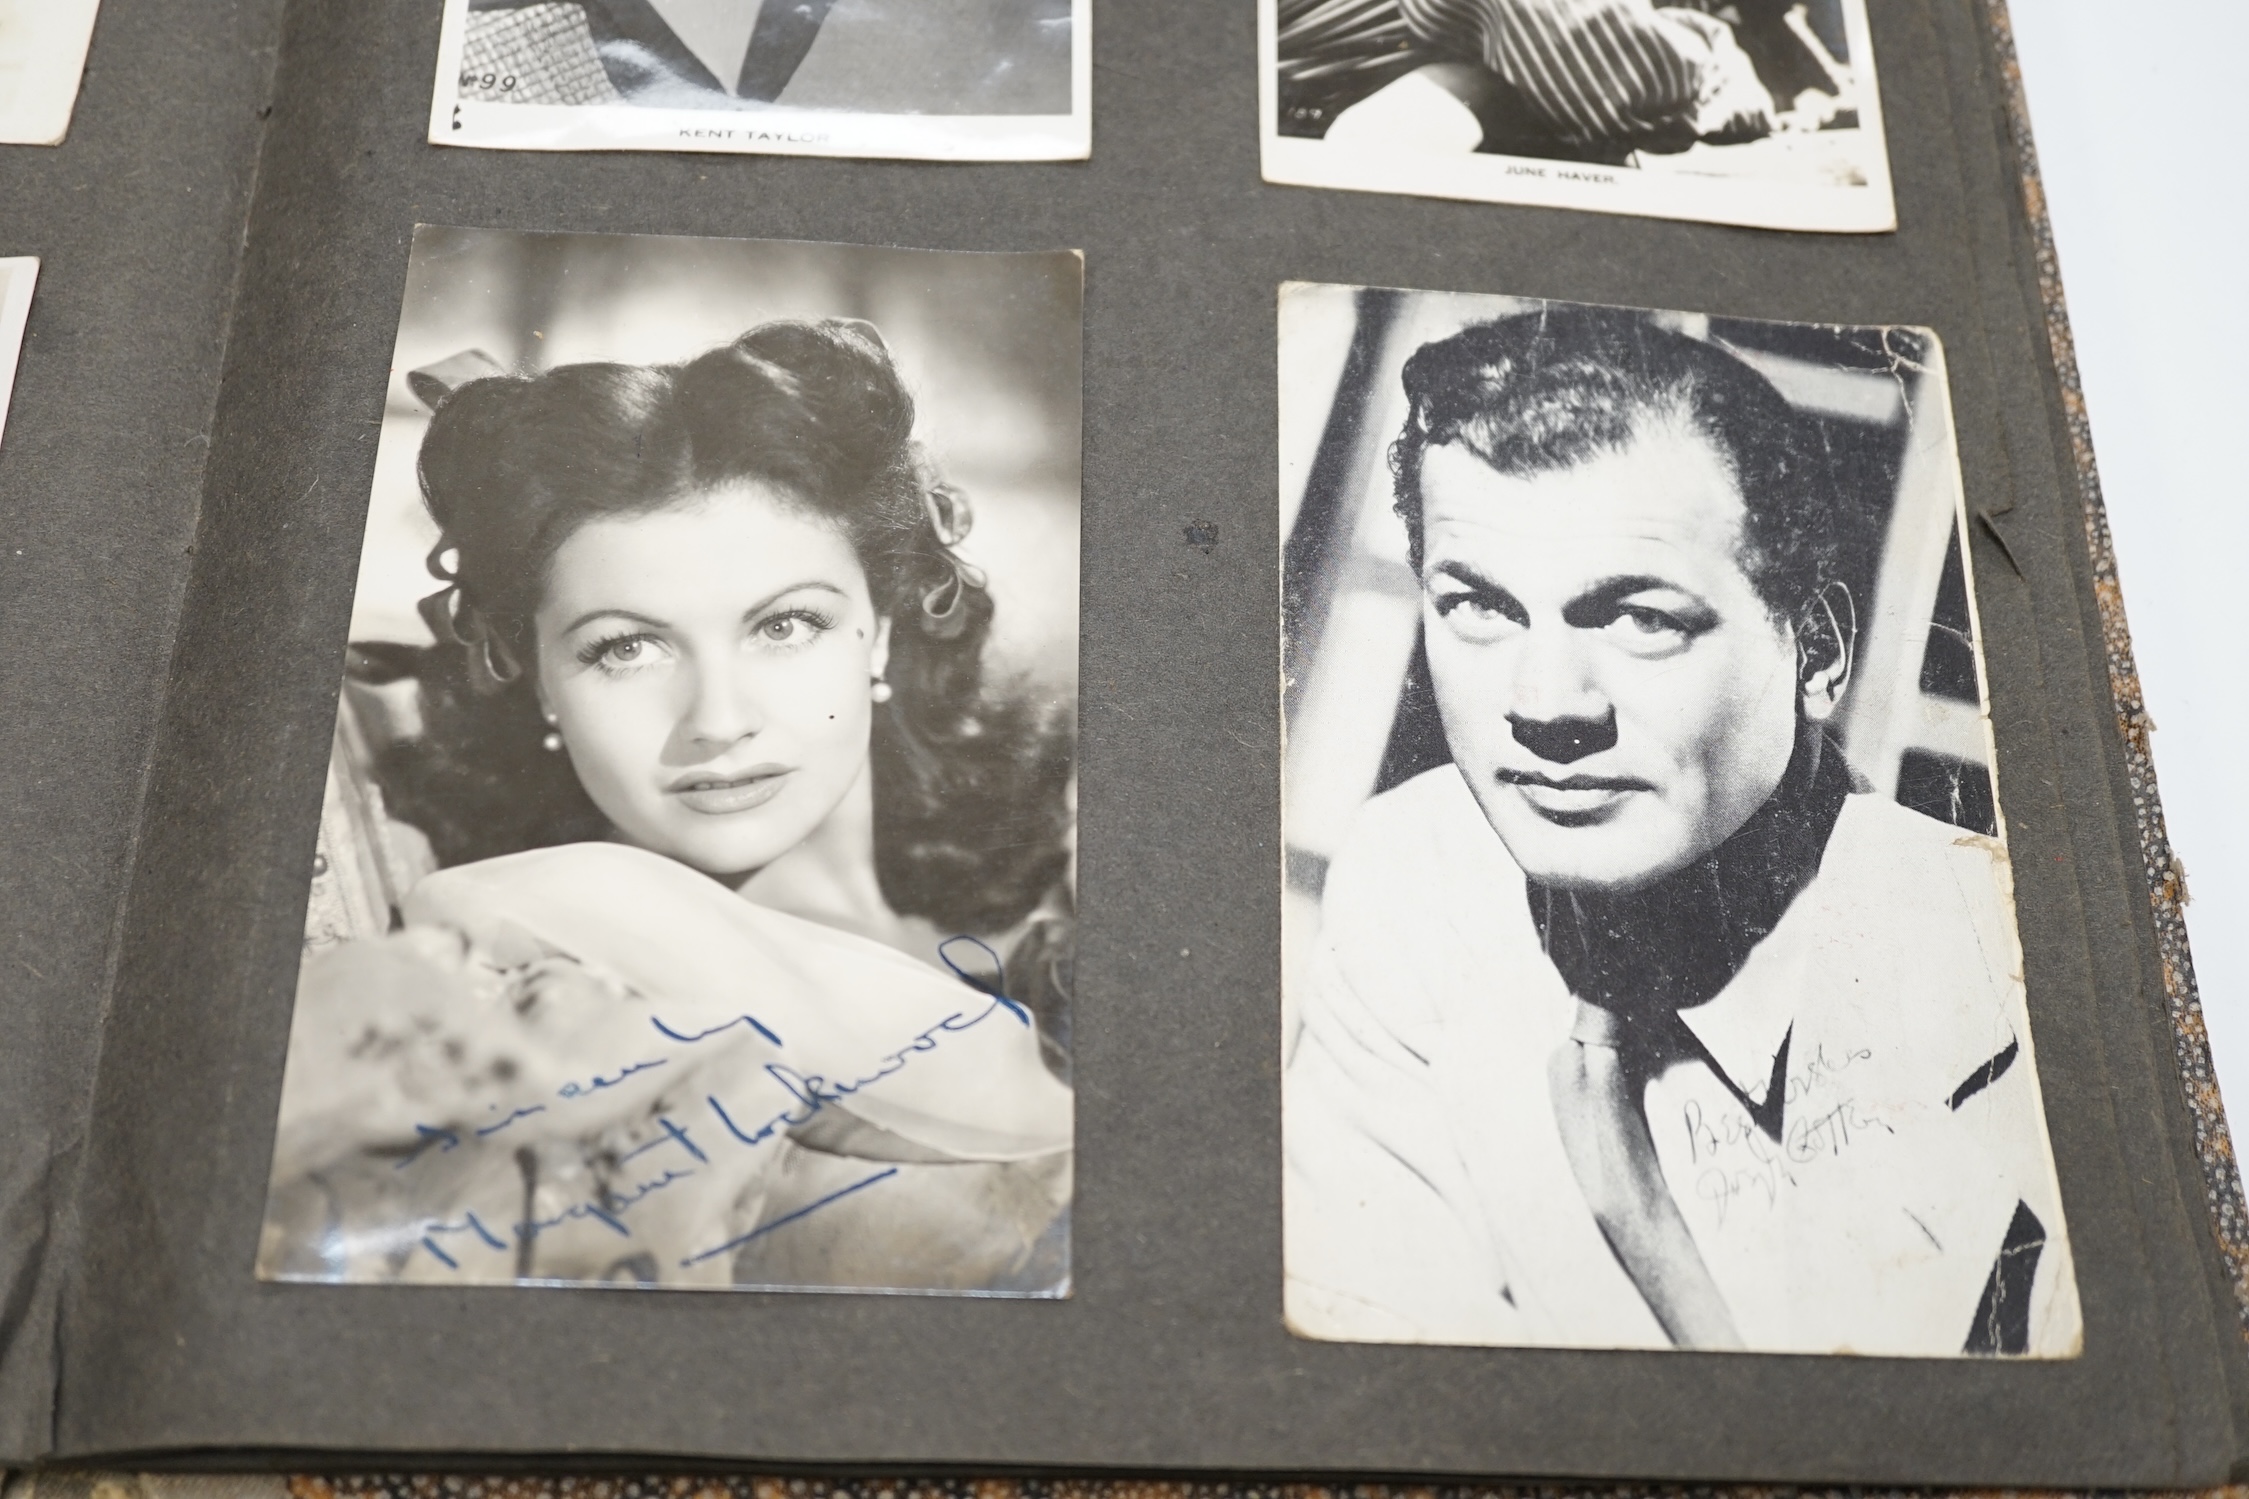 A vintage black and white photograph album with some autographs including Lucille Ball and Margaret O’Brien